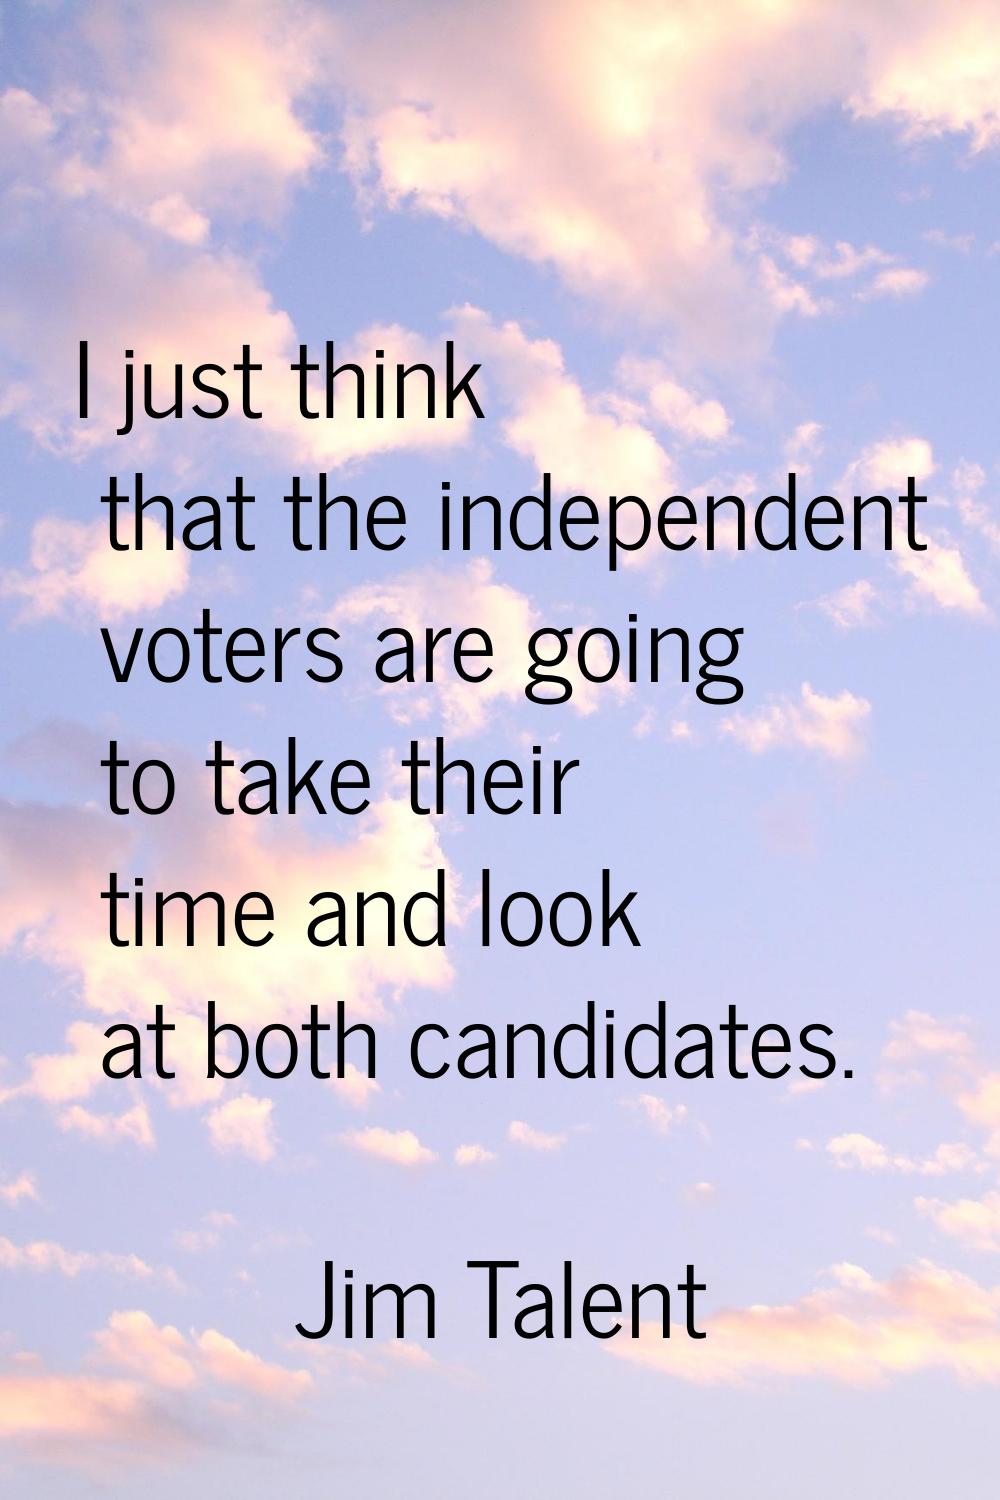 I just think that the independent voters are going to take their time and look at both candidates.